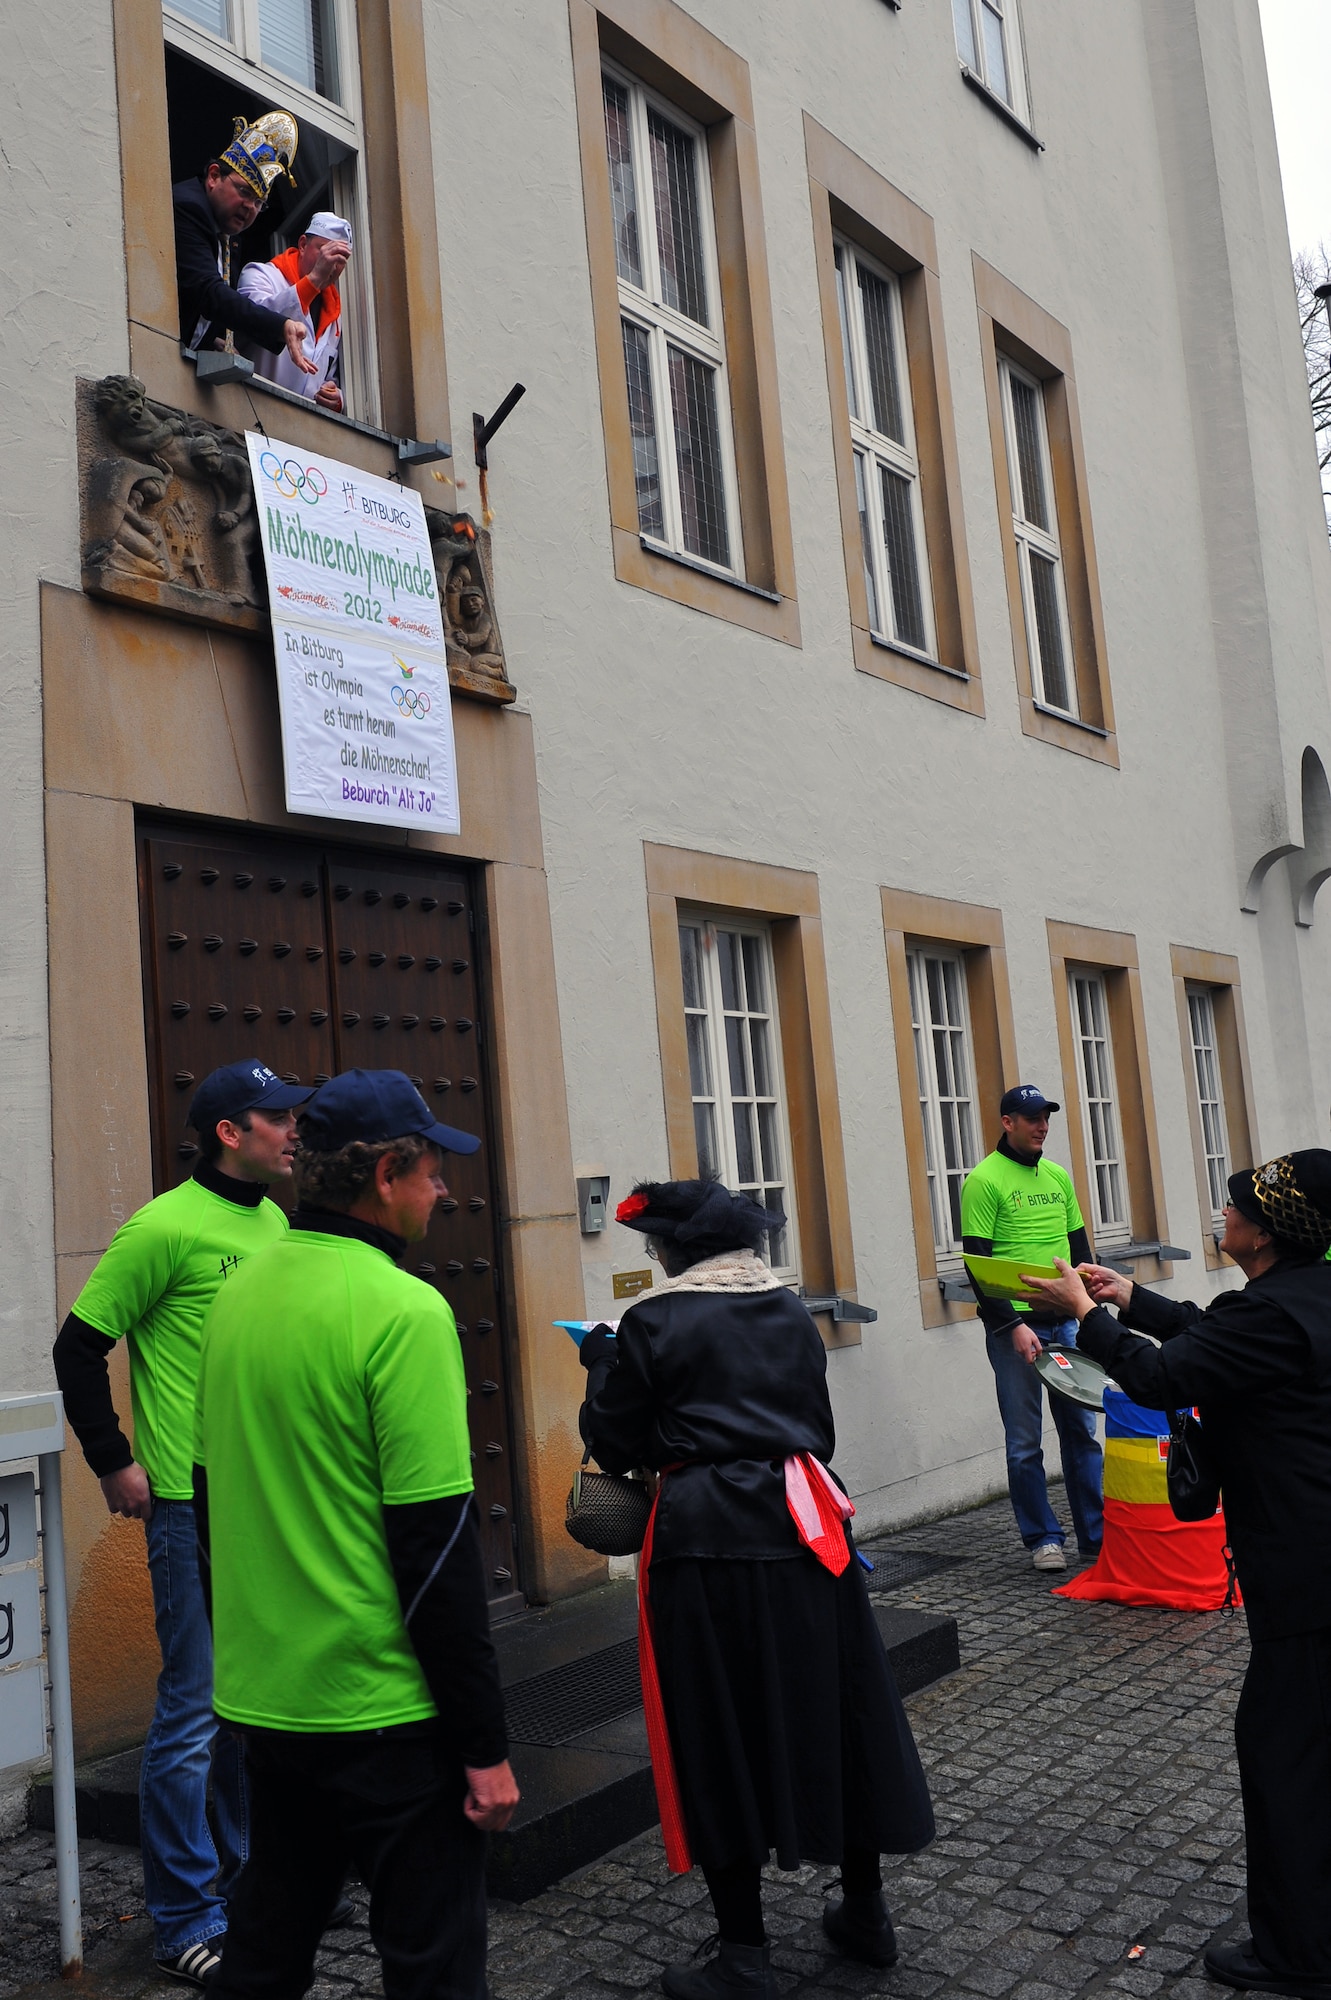 BITBURG, Germany – Joachim Kandels, Bitburg mayor, tosses candy out of a window to people below during Ladies Fasching Day celebrations at the Bitburg Town Hall here Feb. 16. Ladies Fasching Day is a German celebration where women “take over” the city for the day. Once the ladies have “taken over” the city hall, the celebrations begin with dancing and parading throughout the city. The traditional Fasching celebrations begin the Thursday prior to Lent at the 11th minute past the 11th hour, continue until Ash Wednesday and allow people to indulge before the Lent season. (U.S. Air Force photo by Airman 1st Class Dillon Davis/Released)